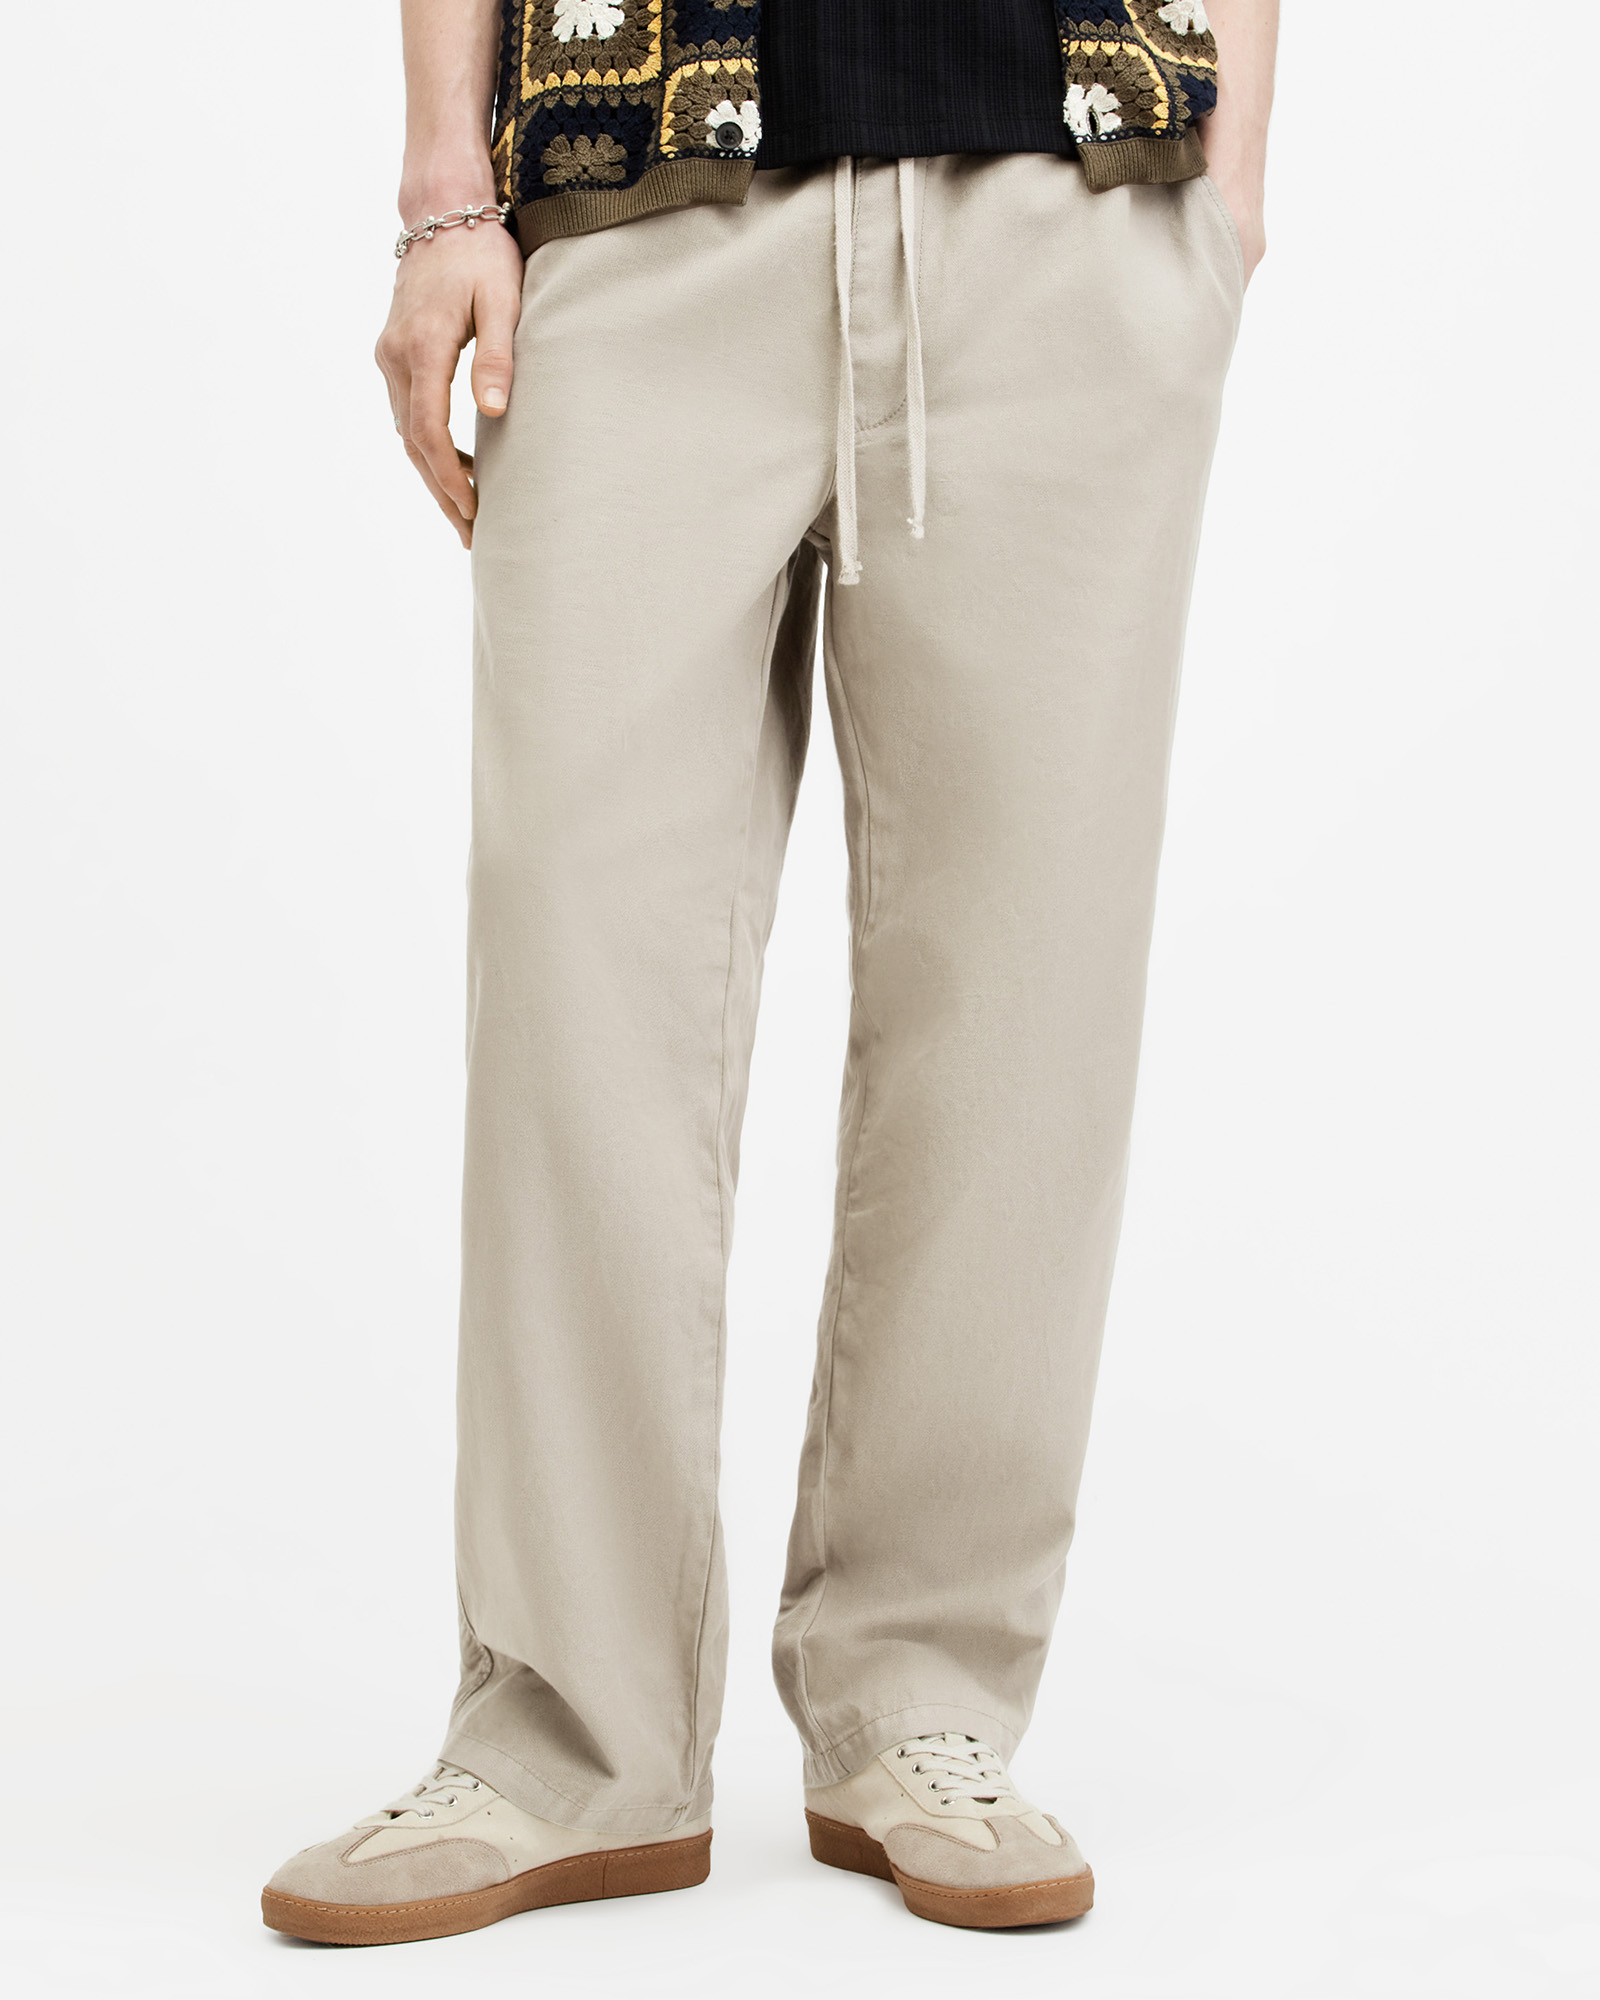 Shop Allsaints Hanbury Straight Fit Trousers, In Oyster Grey